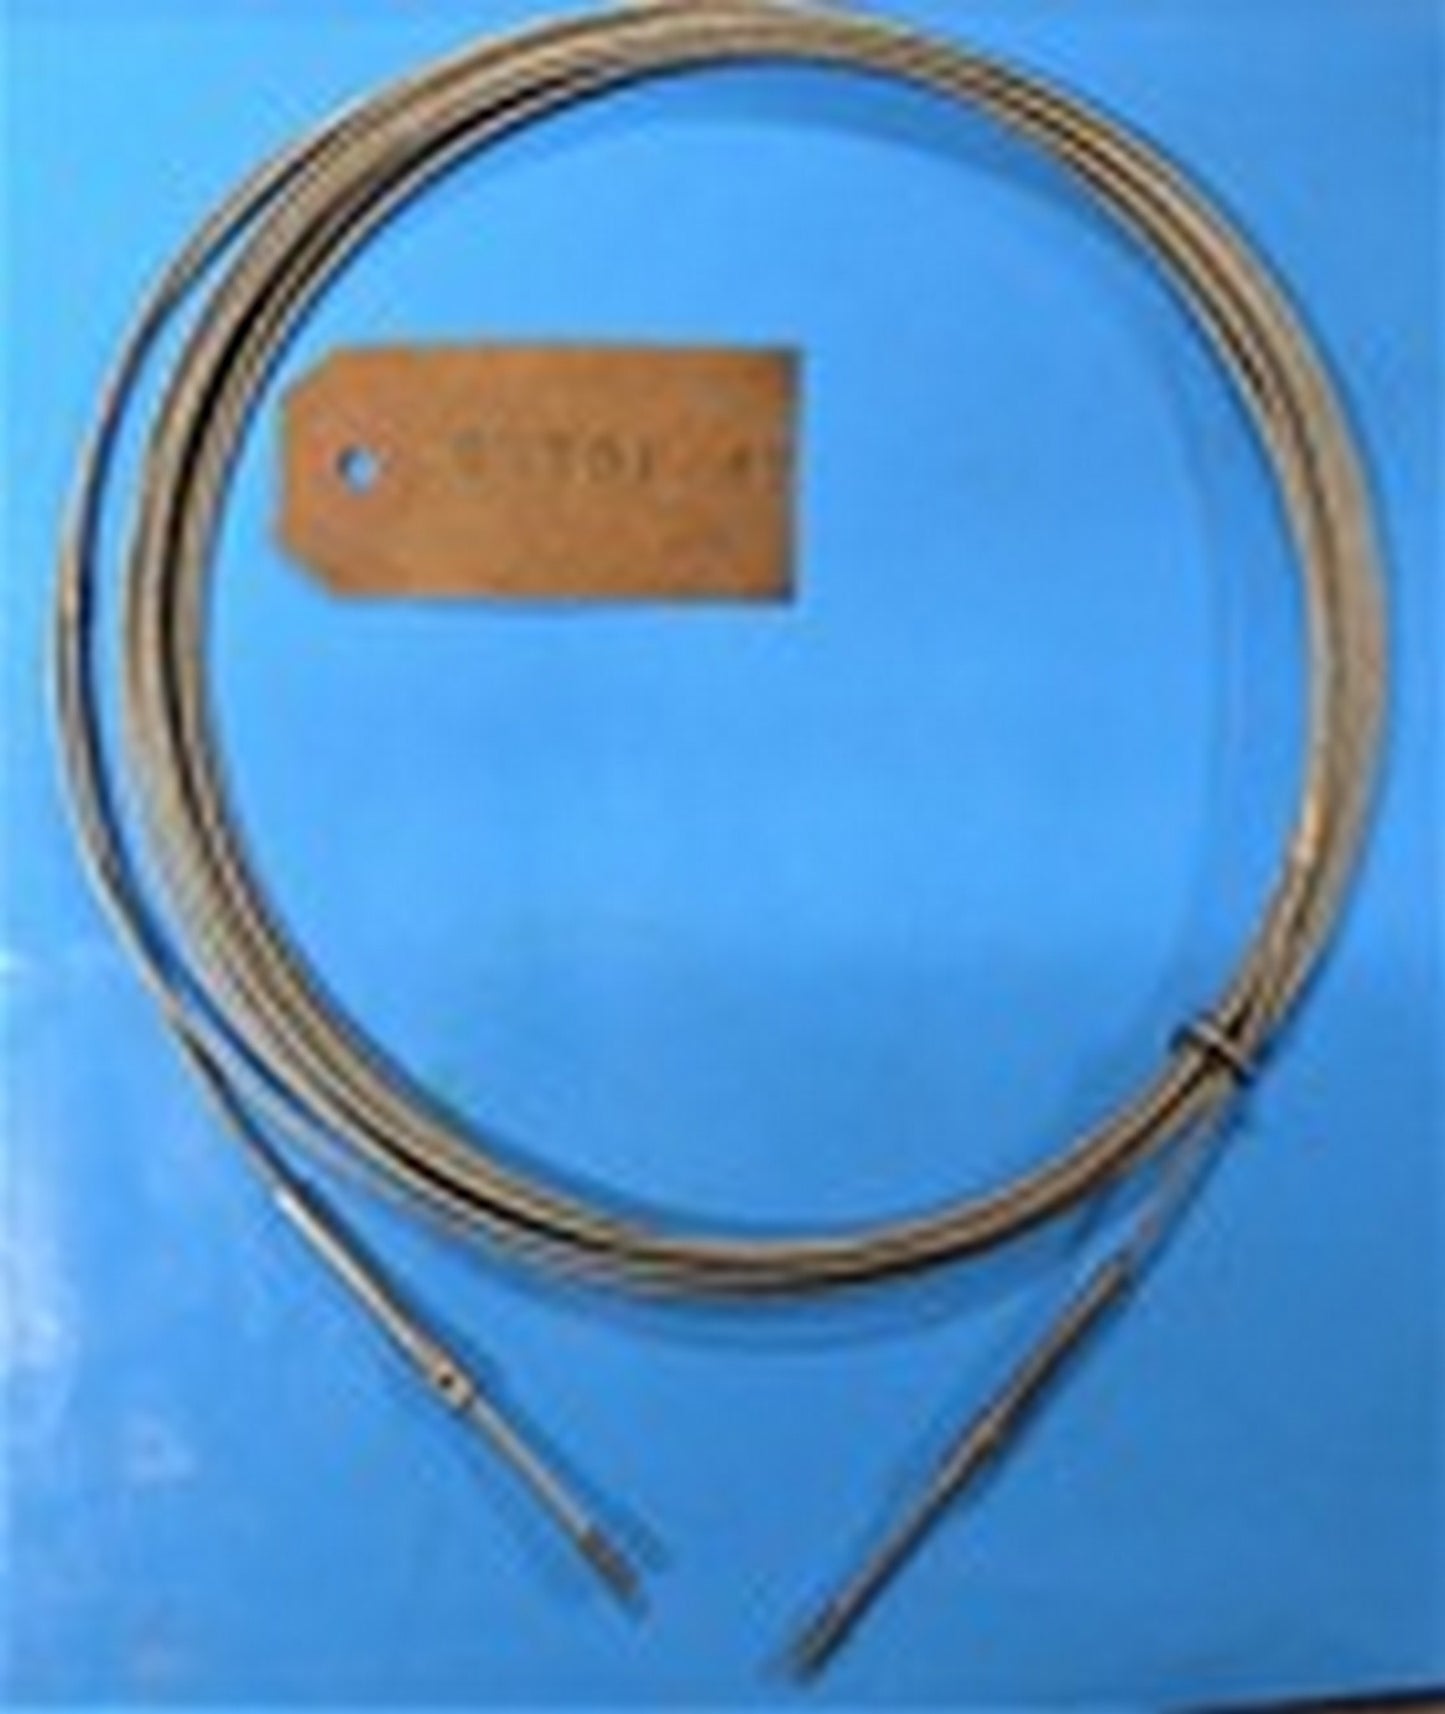 Stabilator Trim Cable Aft (N/S)